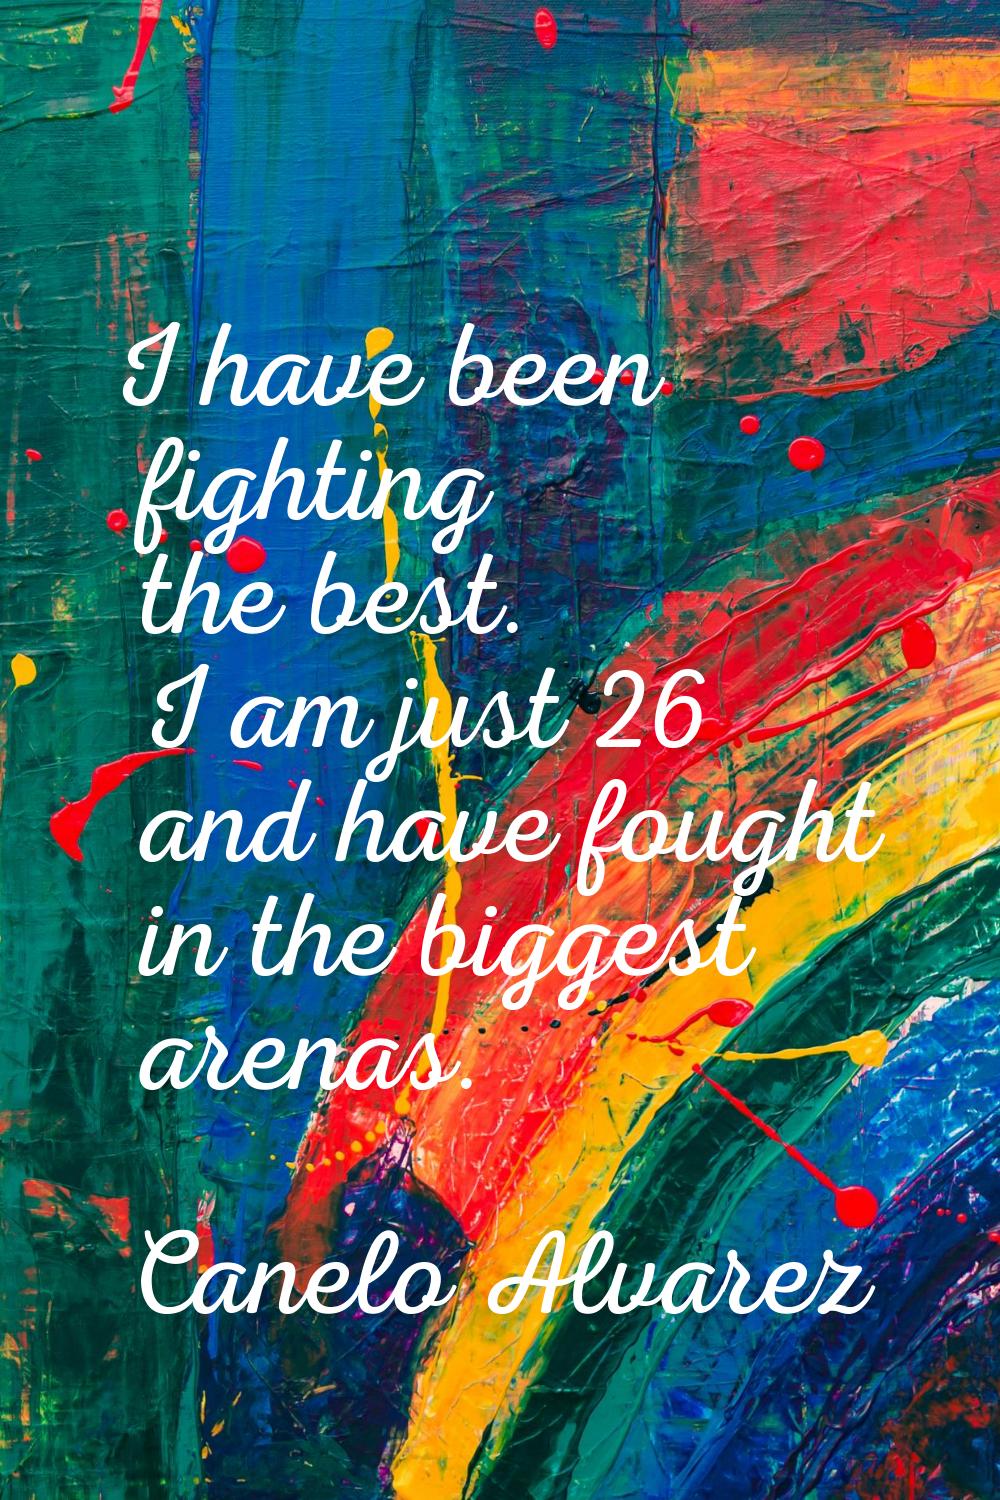 I have been fighting the best. I am just 26 and have fought in the biggest arenas.